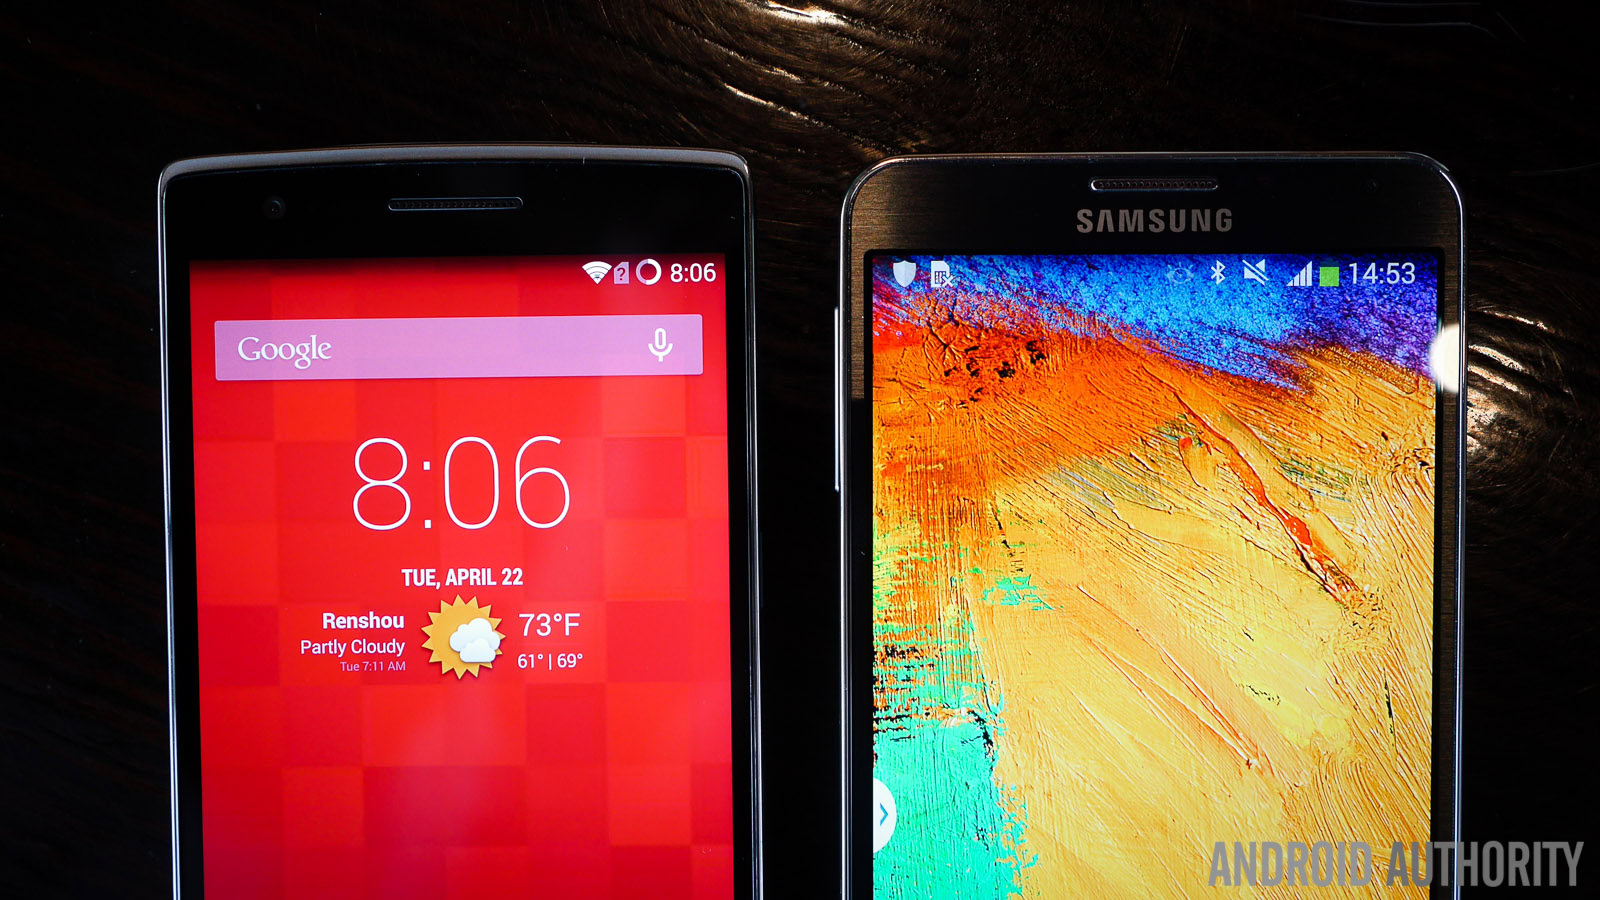 oneplus one vs galaxy note 3 aa (8 of 17)